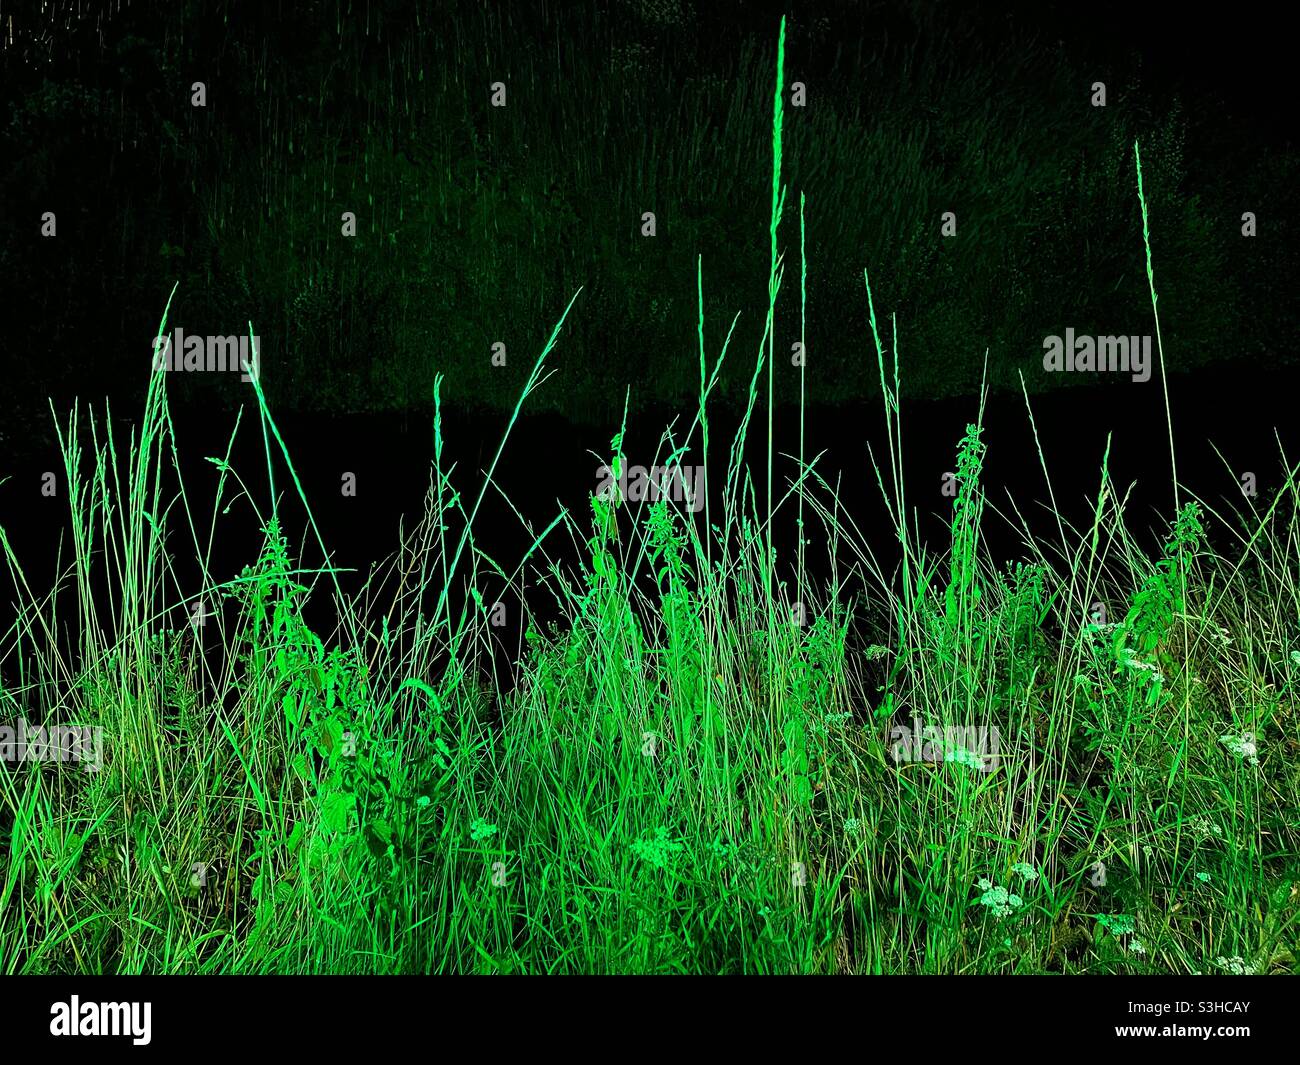 Long green grass against a dark shadow background. No people. Stock Photo